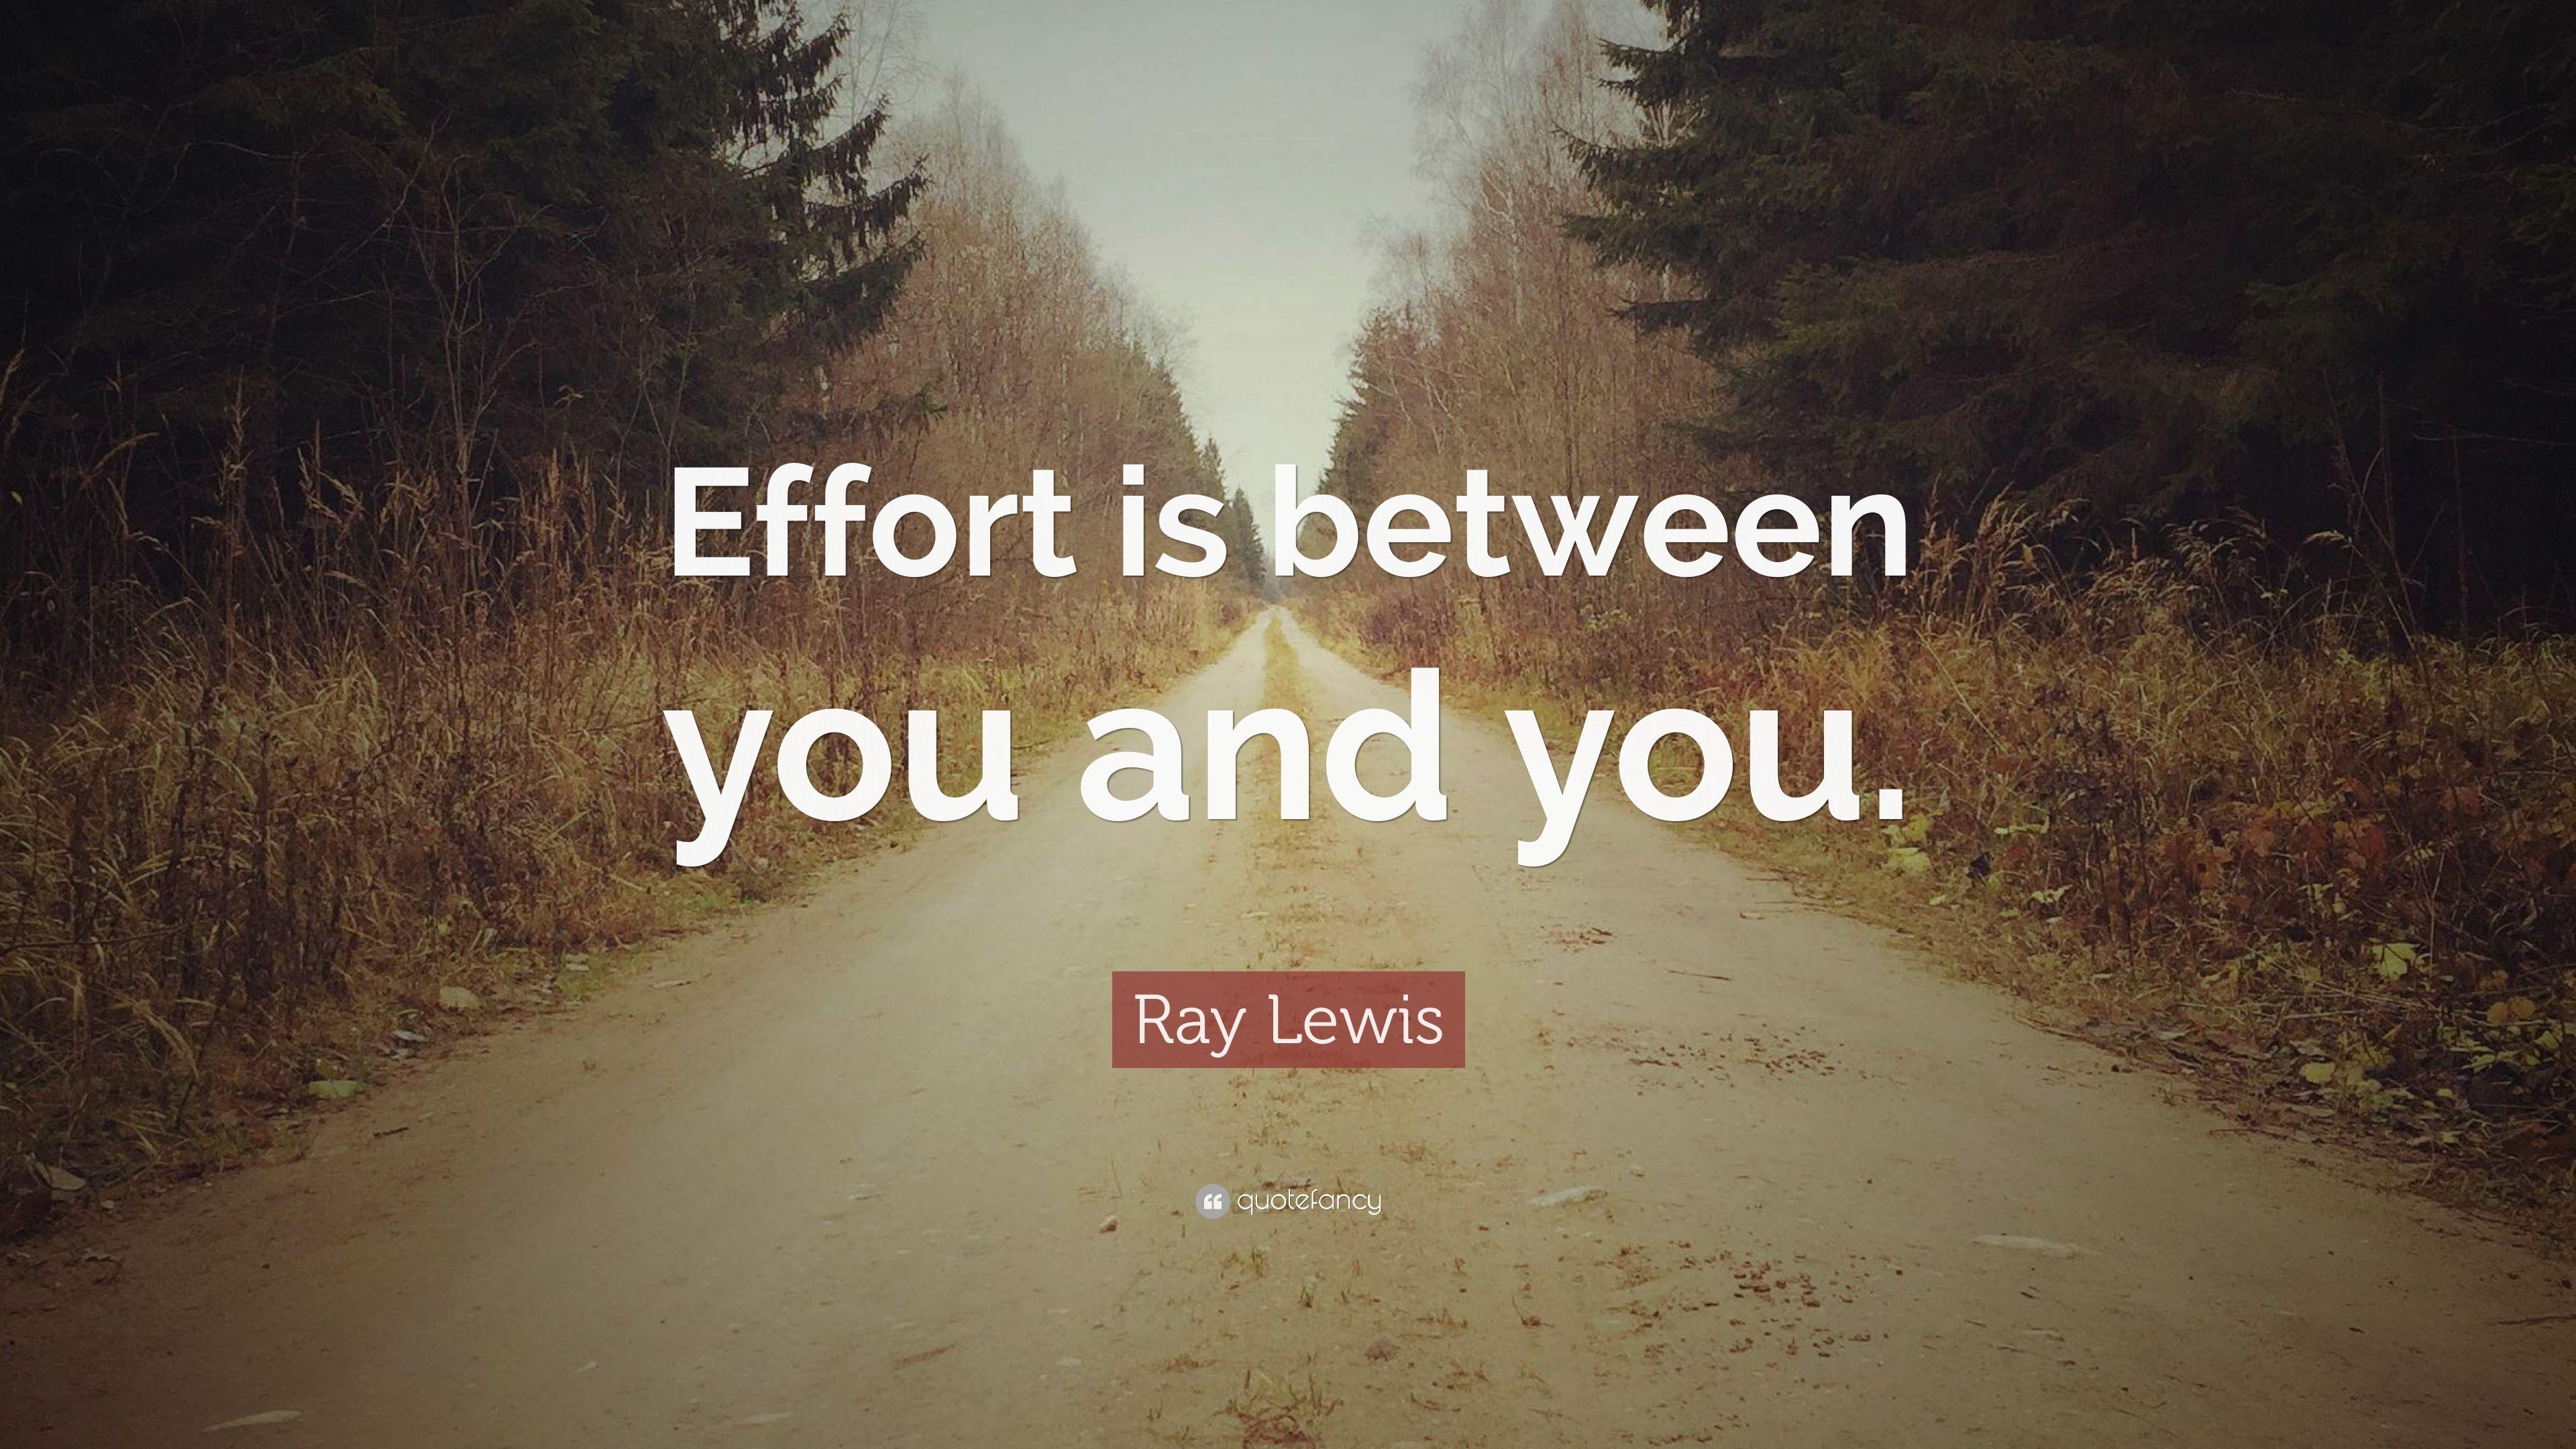 Ray Lewis Quote: “Effort is between you and you.” 12 wallpaper